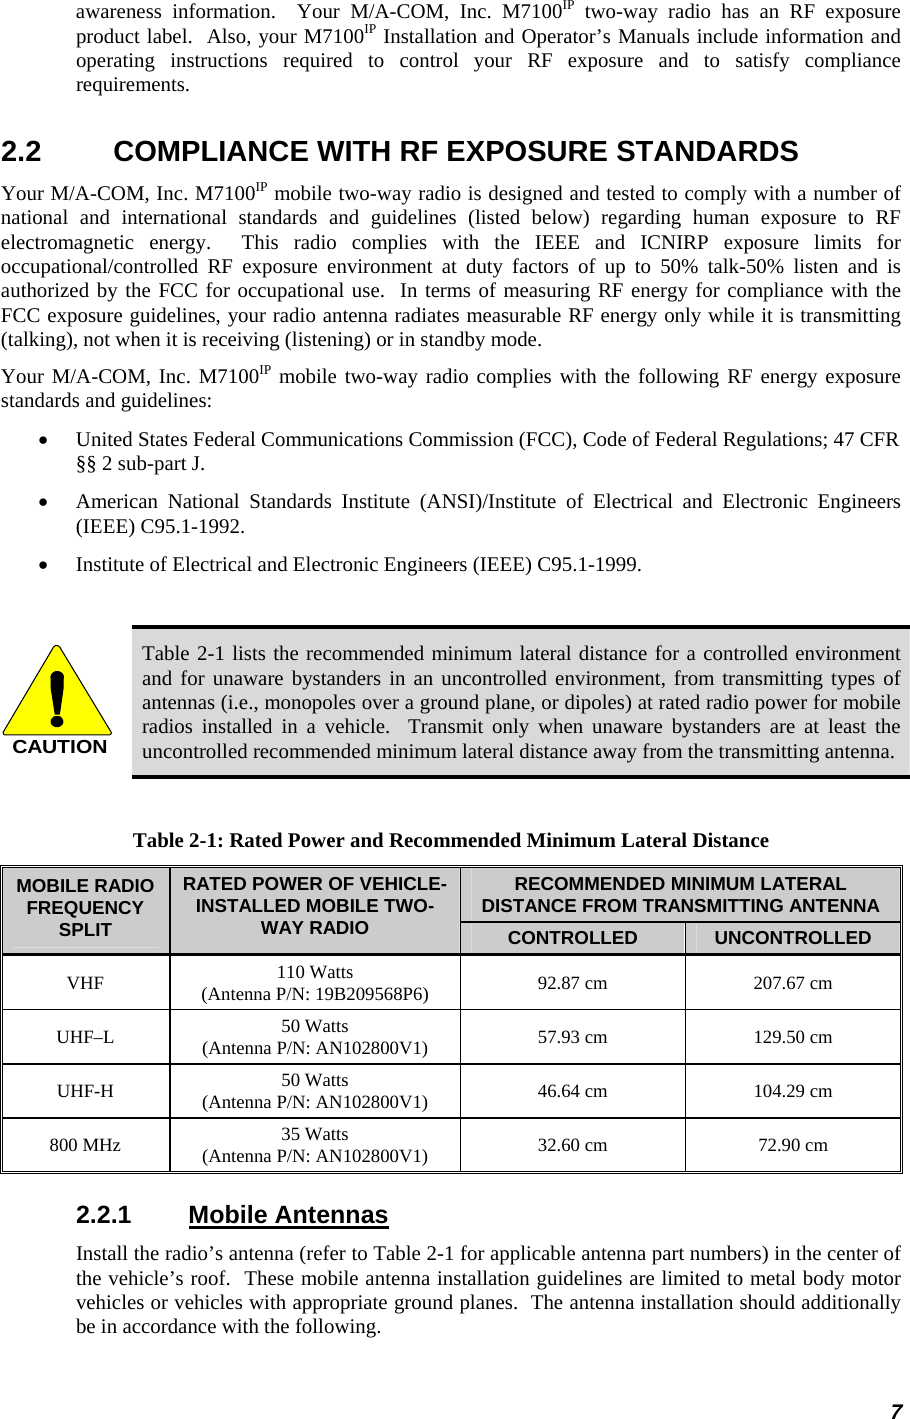 awareness information.  Your M/A-COM, Inc. M7100IP two-way radio has an RF exposure product label.  Also, your M7100IP Installation and Operator’s Manuals include information and operating instructions required to control your RF exposure and to satisfy compliance requirements. 2.2  COMPLIANCE WITH RF EXPOSURE STANDARDS Your M/A-COM, Inc. M7100IP mobile two-way radio is designed and tested to comply with a number of national and international standards and guidelines (listed below) regarding human exposure to RF electromagnetic energy.  This radio complies with the IEEE and ICNIRP exposure limits for occupational/controlled RF exposure environment at duty factors of up to 50% talk-50% listen and is authorized by the FCC for occupational use.  In terms of measuring RF energy for compliance with the FCC exposure guidelines, your radio antenna radiates measurable RF energy only while it is transmitting (talking), not when it is receiving (listening) or in standby mode. Your M/A-COM, Inc. M7100IP mobile two-way radio complies with the following RF energy exposure standards and guidelines: •  United States Federal Communications Commission (FCC), Code of Federal Regulations; 47 CFR §§ 2 sub-part J. •  American National Standards Institute (ANSI)/Institute of Electrical and Electronic Engineers (IEEE) C95.1-1992. •  Institute of Electrical and Electronic Engineers (IEEE) C95.1-1999.  CAUTION Table 2-1 lists the recommended minimum lateral distance for a controlled environment and for unaware bystanders in an uncontrolled environment, from transmitting types of antennas (i.e., monopoles over a ground plane, or dipoles) at rated radio power for mobile radios installed in a vehicle.  Transmit only when unaware bystanders are at least the uncontrolled recommended minimum lateral distance away from the transmitting antenna.  Table 2-1: Rated Power and Recommended Minimum Lateral Distance RECOMMENDED MINIMUM LATERAL DISTANCE FROM TRANSMITTING ANTENNA MOBILE RADIO FREQUENCY SPLIT RATED POWER OF VEHICLE-INSTALLED MOBILE TWO-WAY RADIO  CONTROLLED  UNCONTROLLED VHF  110 Watts (Antenna P/N: 19B209568P6)  92.87 cm  207.67 cm UHF–L  50 Watts (Antenna P/N: AN102800V1)  57.93 cm  129.50 cm UHF-H  50 Watts (Antenna P/N: AN102800V1)  46.64 cm  104.29 cm 800 MHz  35 Watts (Antenna P/N: AN102800V1)  32.60 cm  72.90 cm 2.2.1 Mobile Antennas Install the radio’s antenna (refer to Table 2-1 for applicable antenna part numbers) in the center of the vehicle’s roof.  These mobile antenna installation guidelines are limited to metal body motor vehicles or vehicles with appropriate ground planes.  The antenna installation should additionally be in accordance with the following. 7 